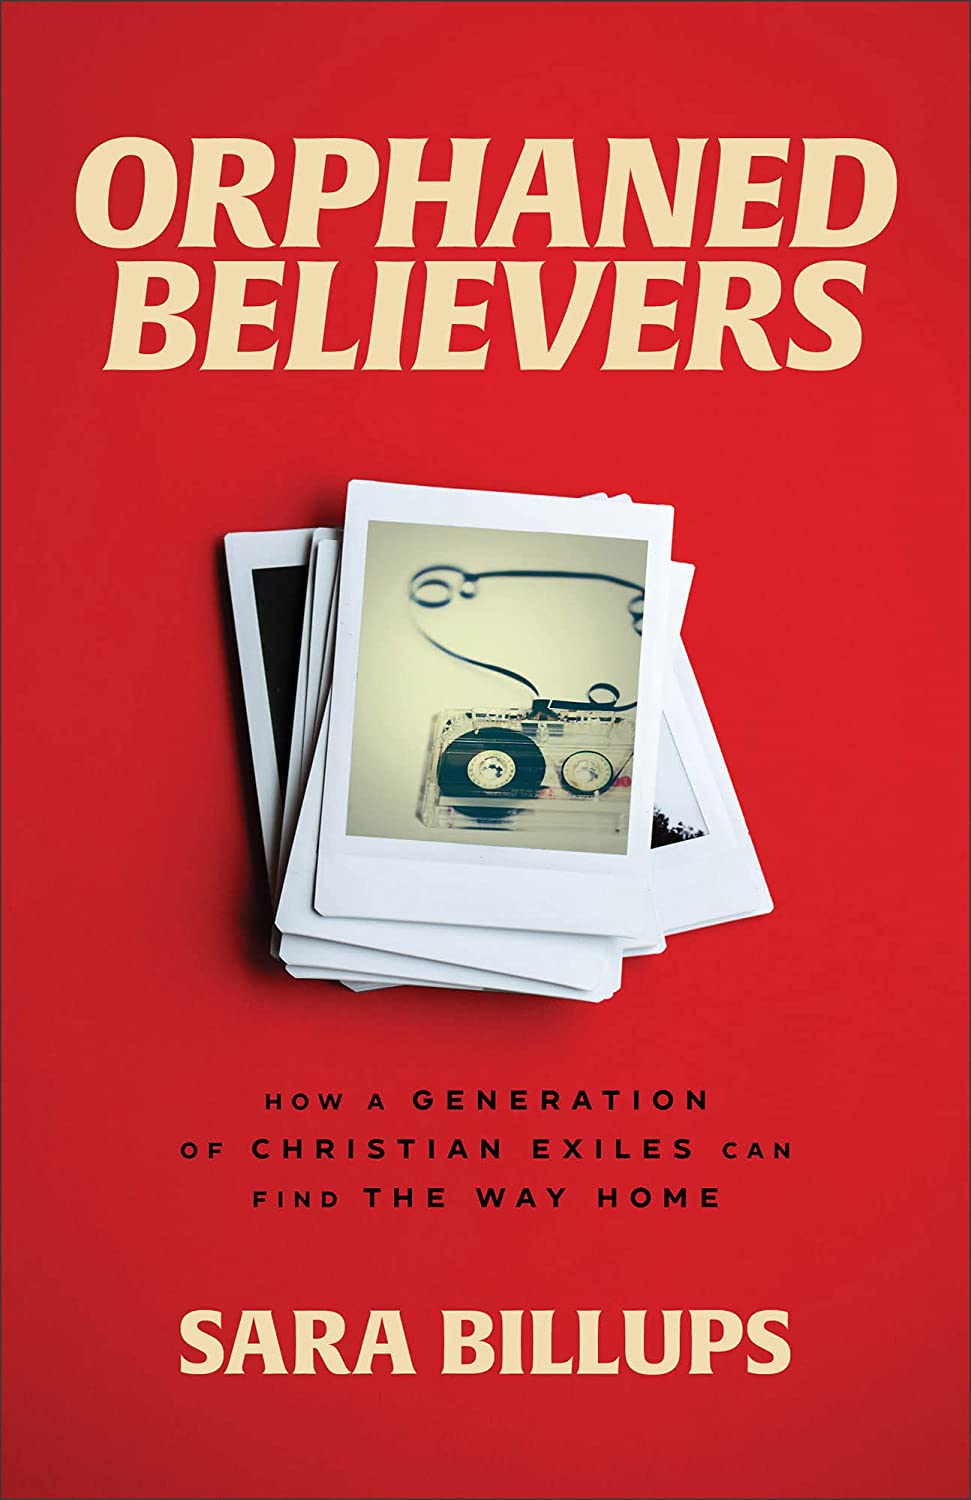 Orphaned Believers: How a Generation of Christian Exiles Can Find the Way Home